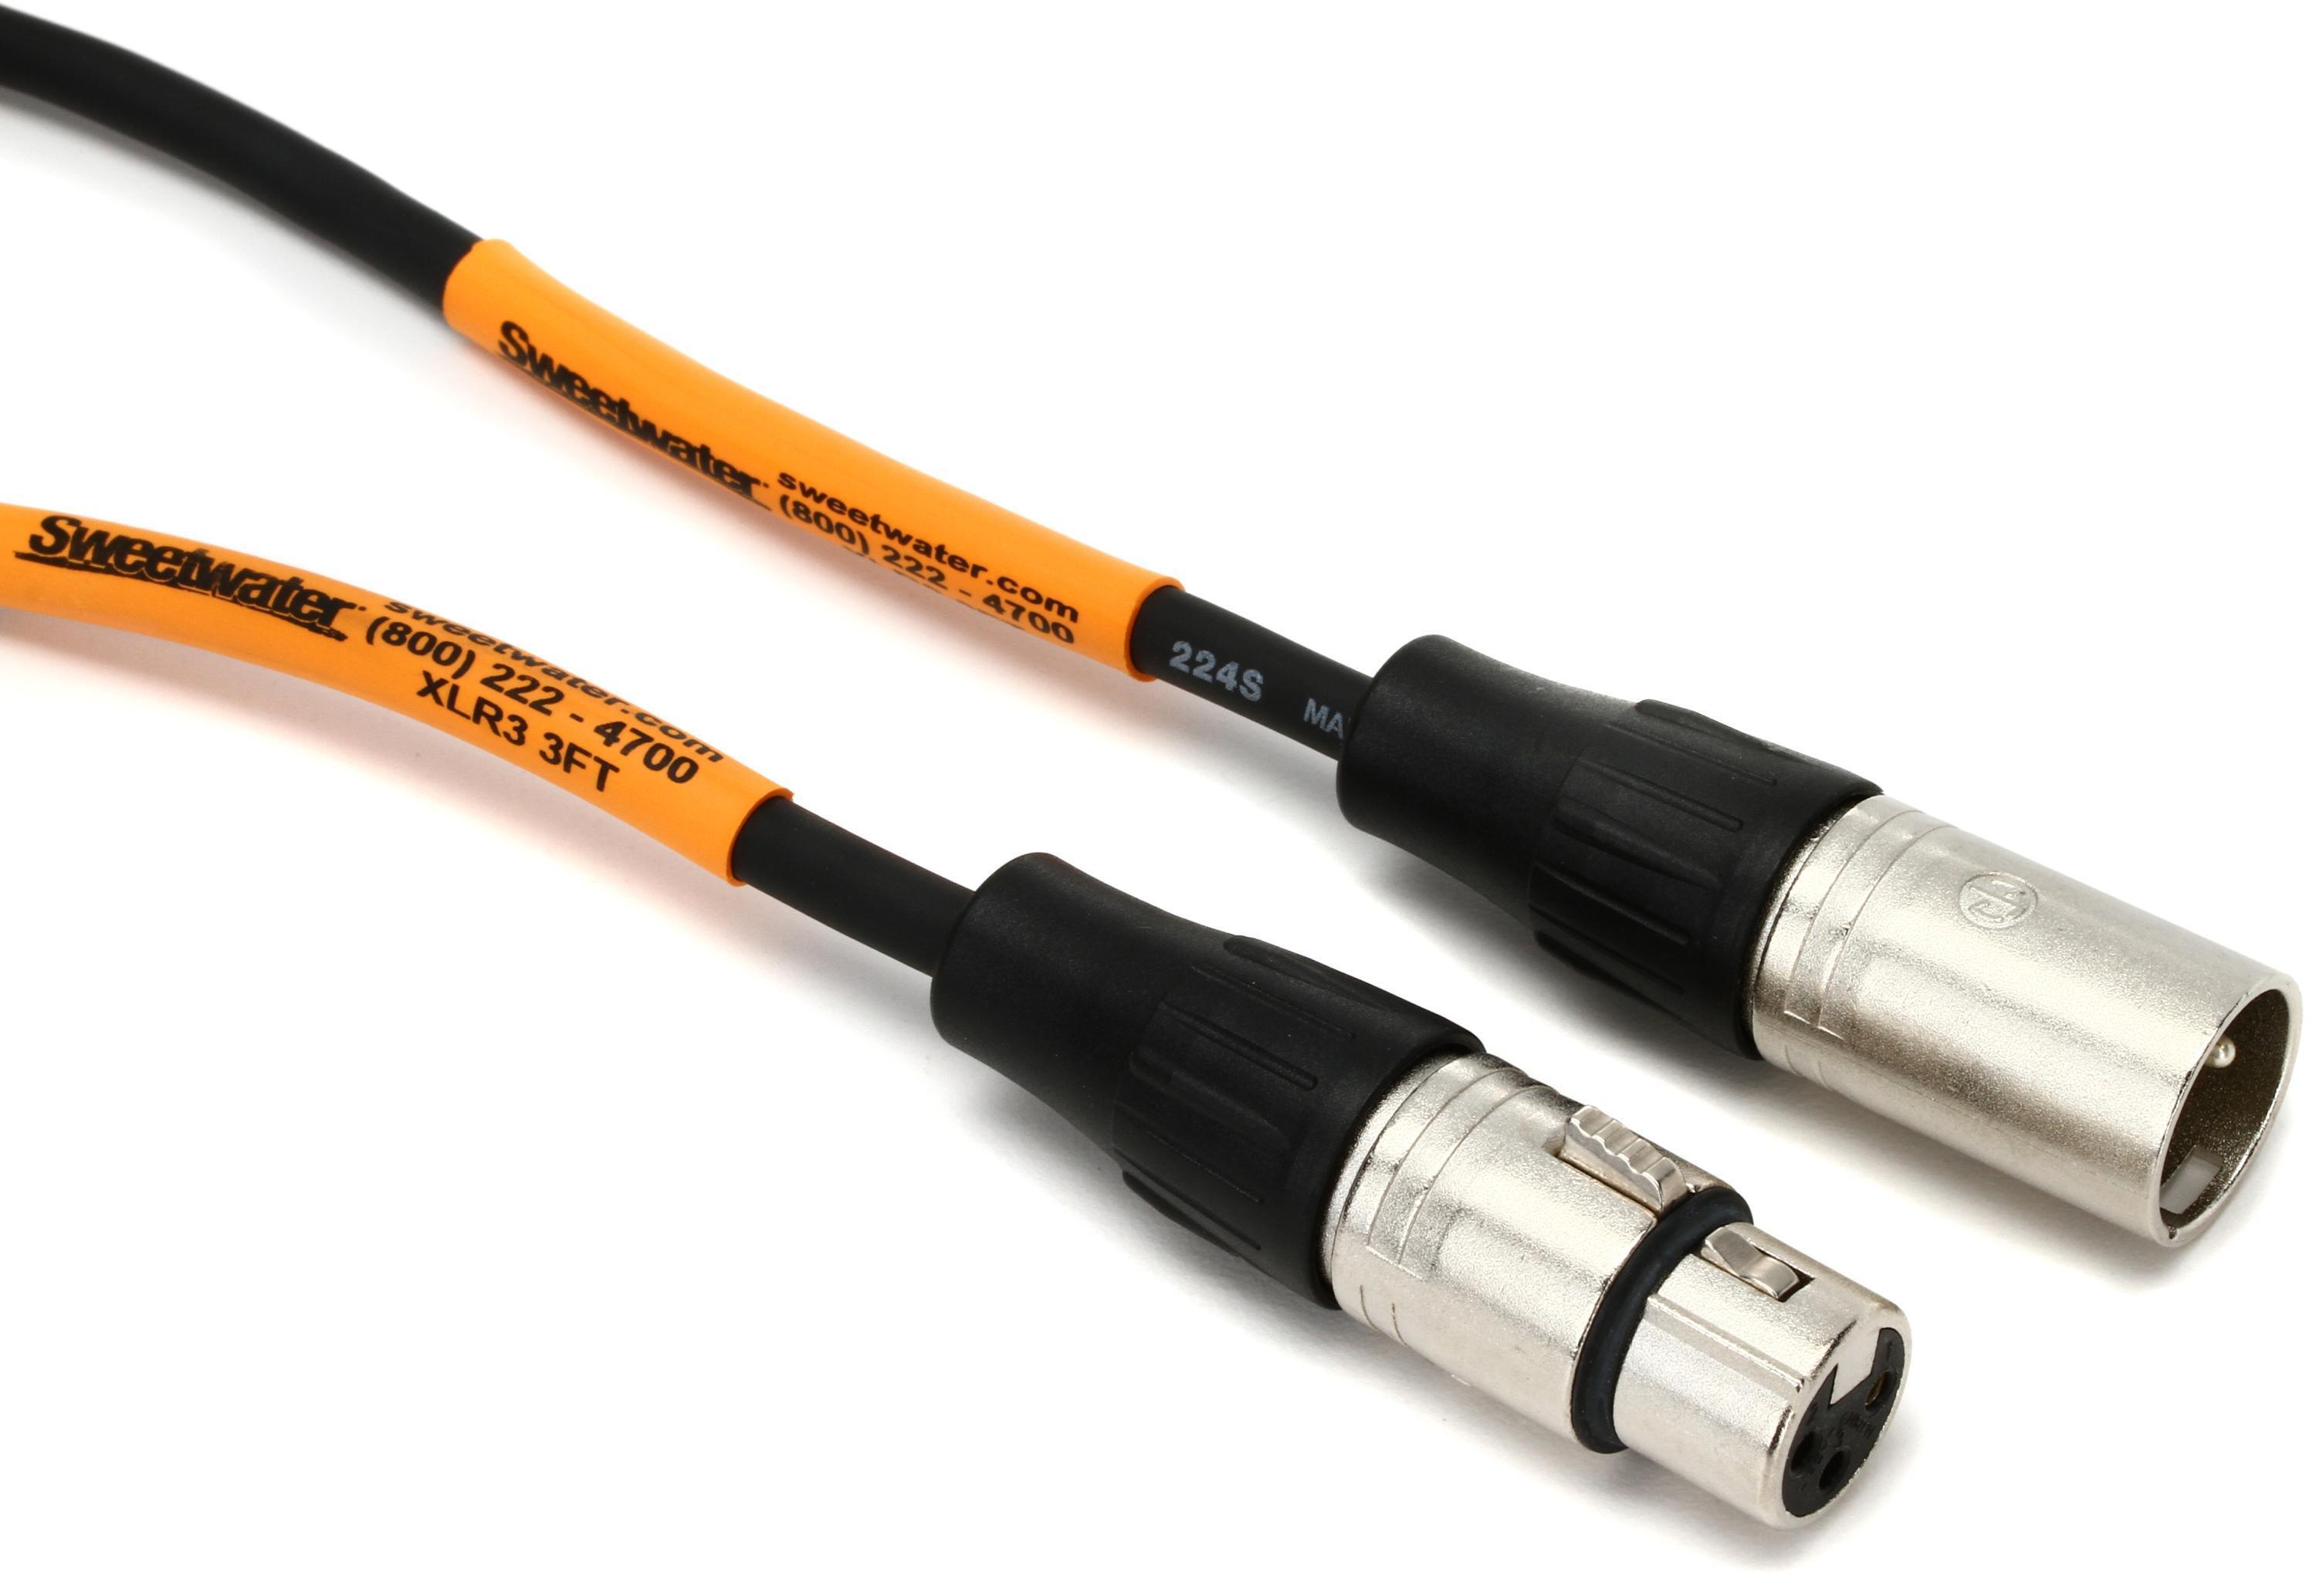 Bundled Item: Pro Co EXM-3 Excellines XLR Female to XLR Male Patch Cable - 3 foot